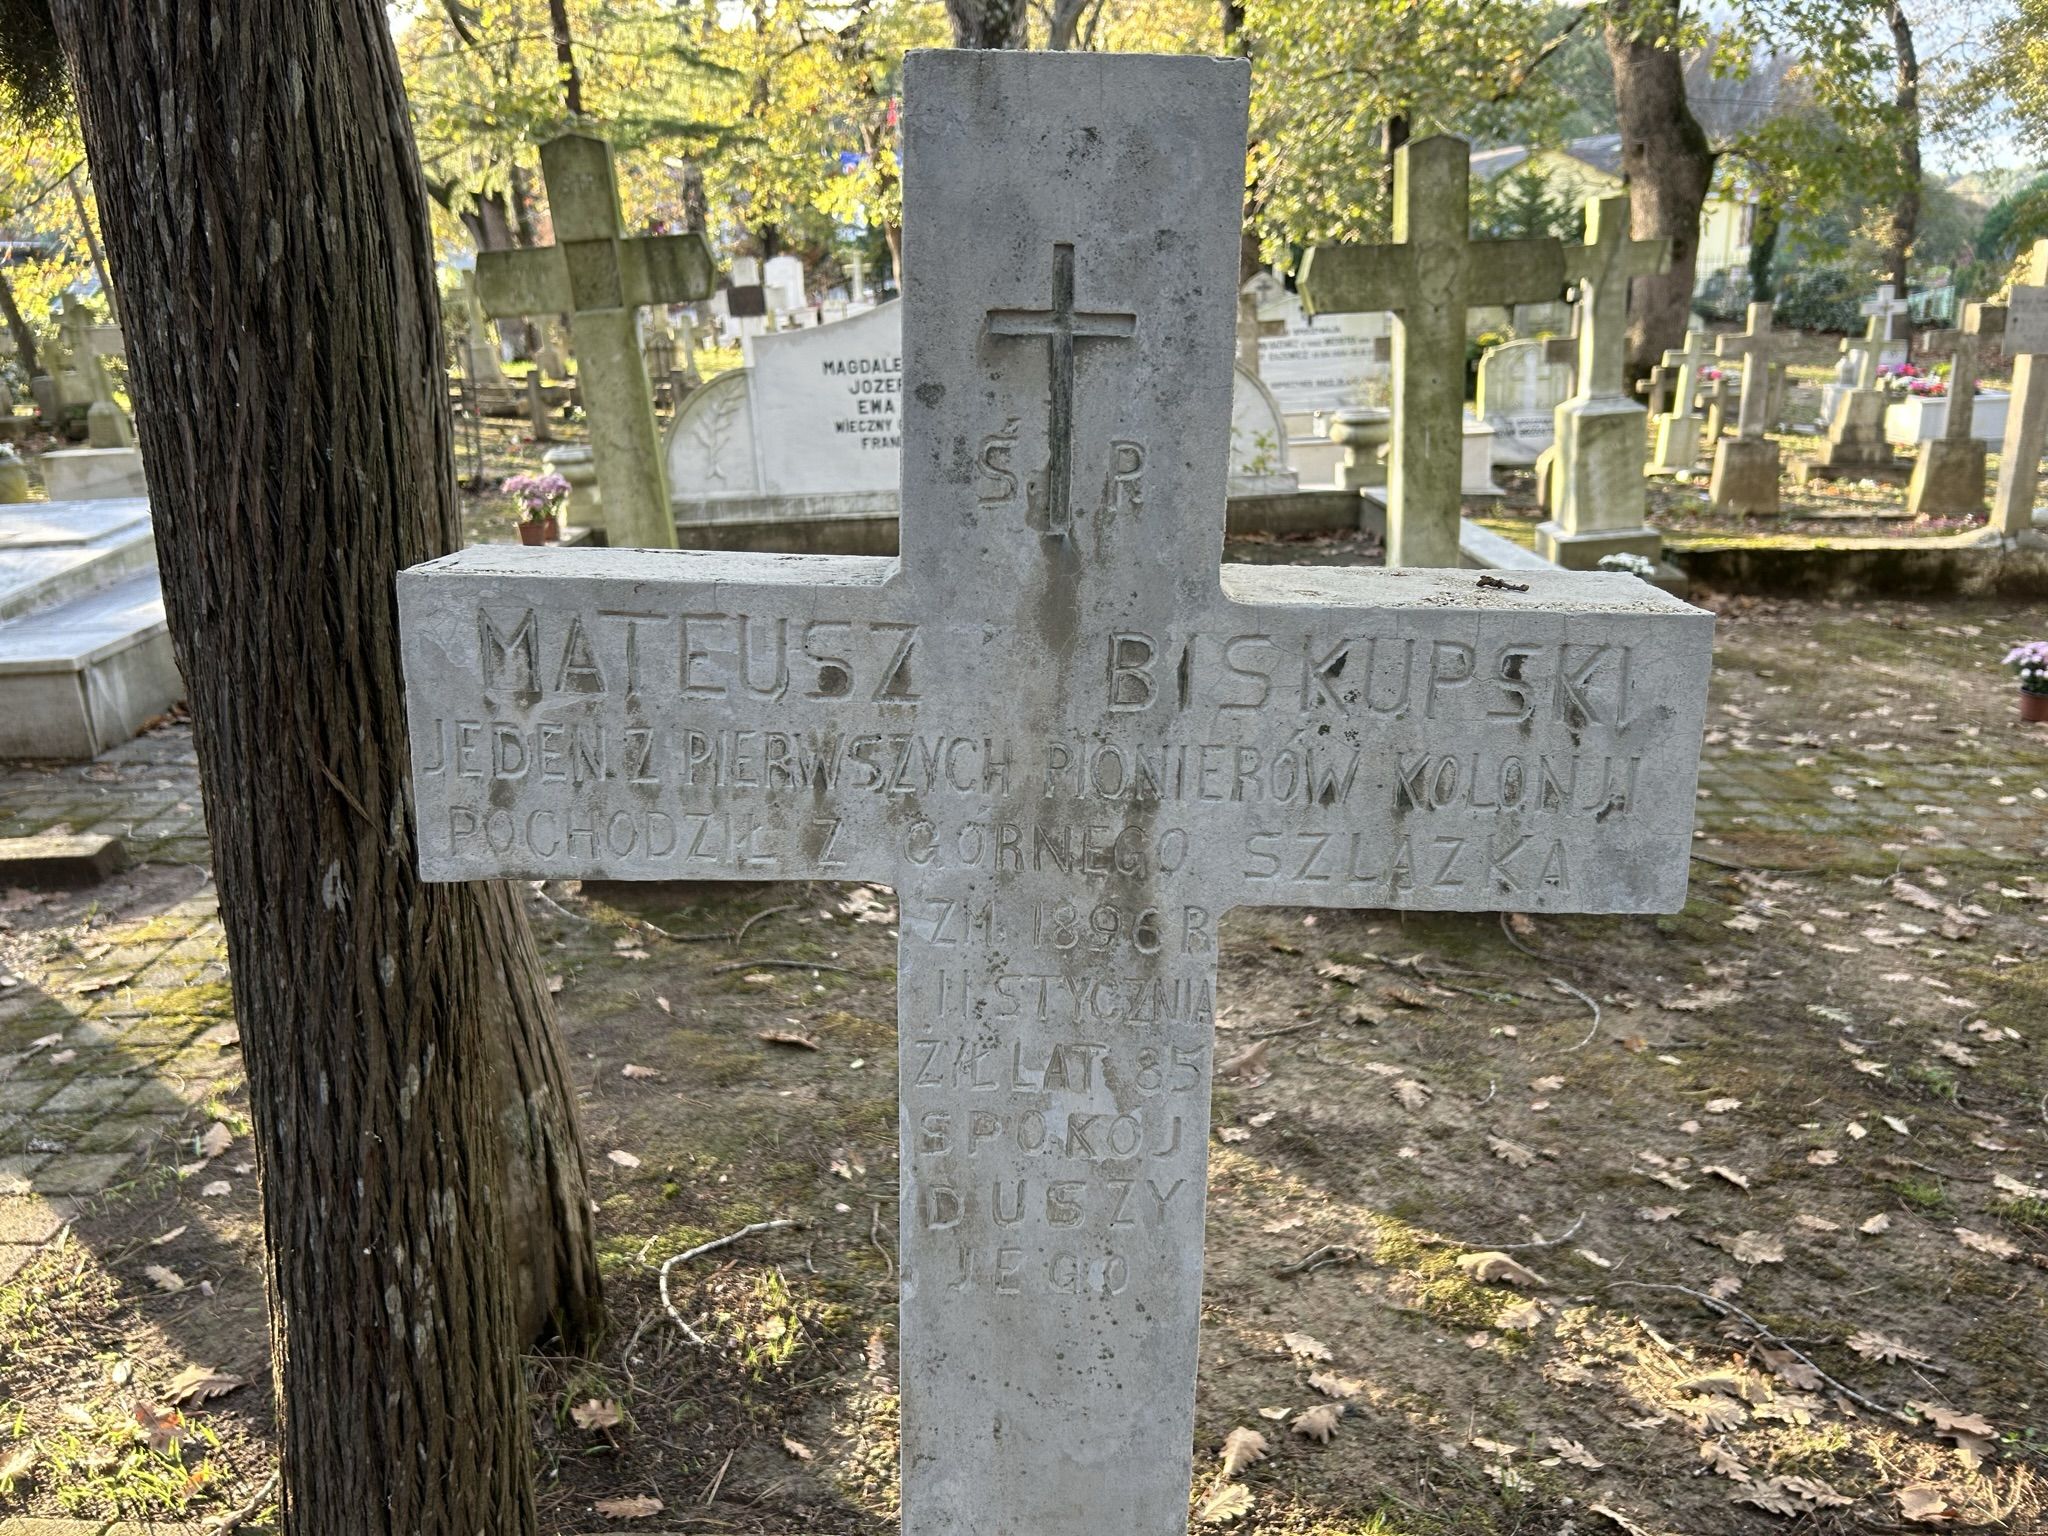 Inscription from the gravestone of Mateusz Biskupski, Catholic cemetery in Adampol